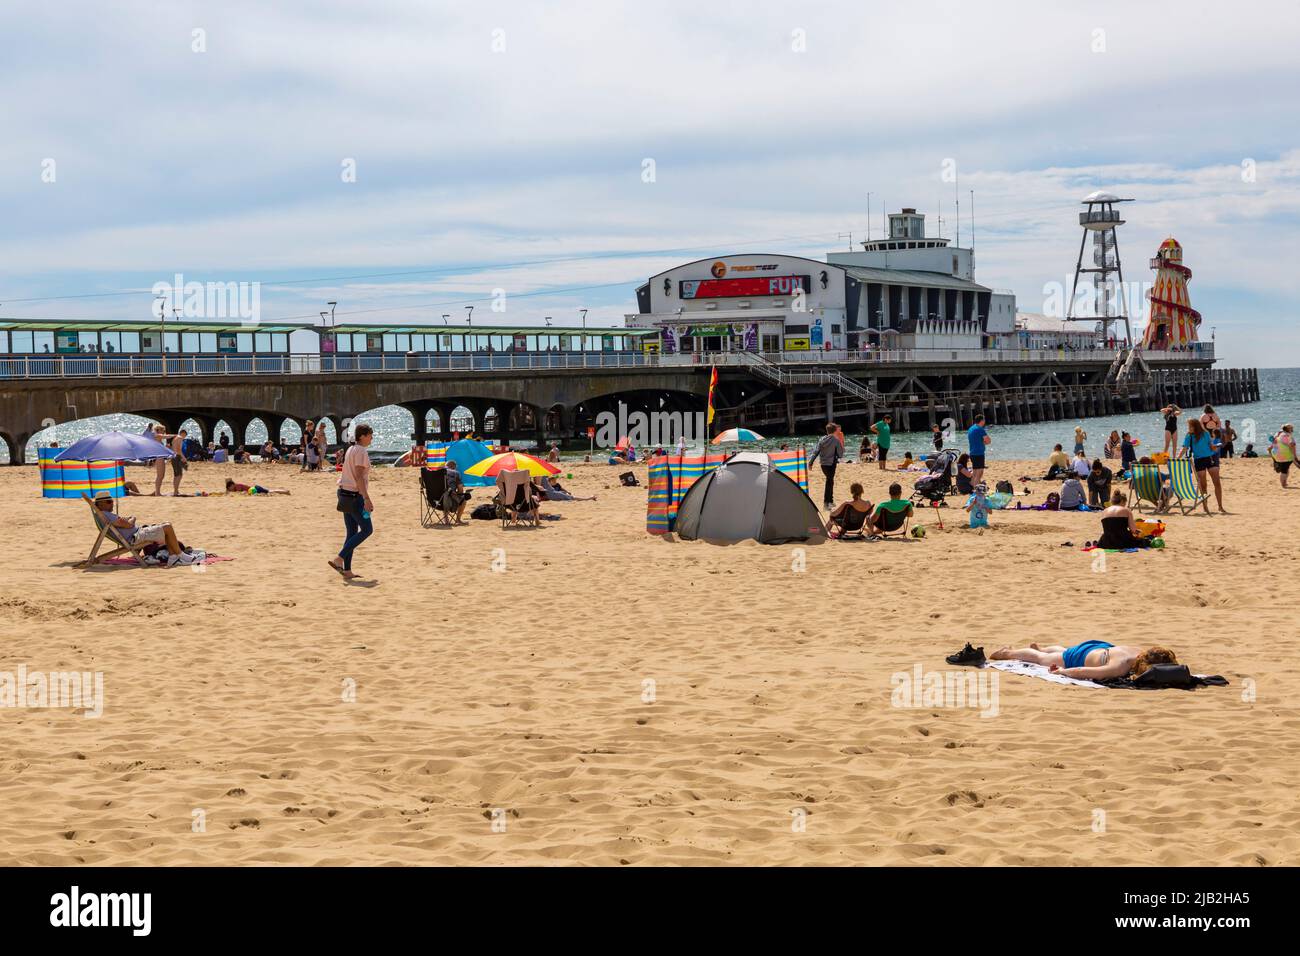 Bournemouth, Dorset UK. 2nd June 2022. UK weather: lovely warm and sunny as crowds flock to Bournemouth beaches to enjoy the sunshine at the seaside for the start of the long weekend to celebrate the Queens Platinum Jubilee. Credit: Carolyn Jenkins/Alamy Live News Stock Photo